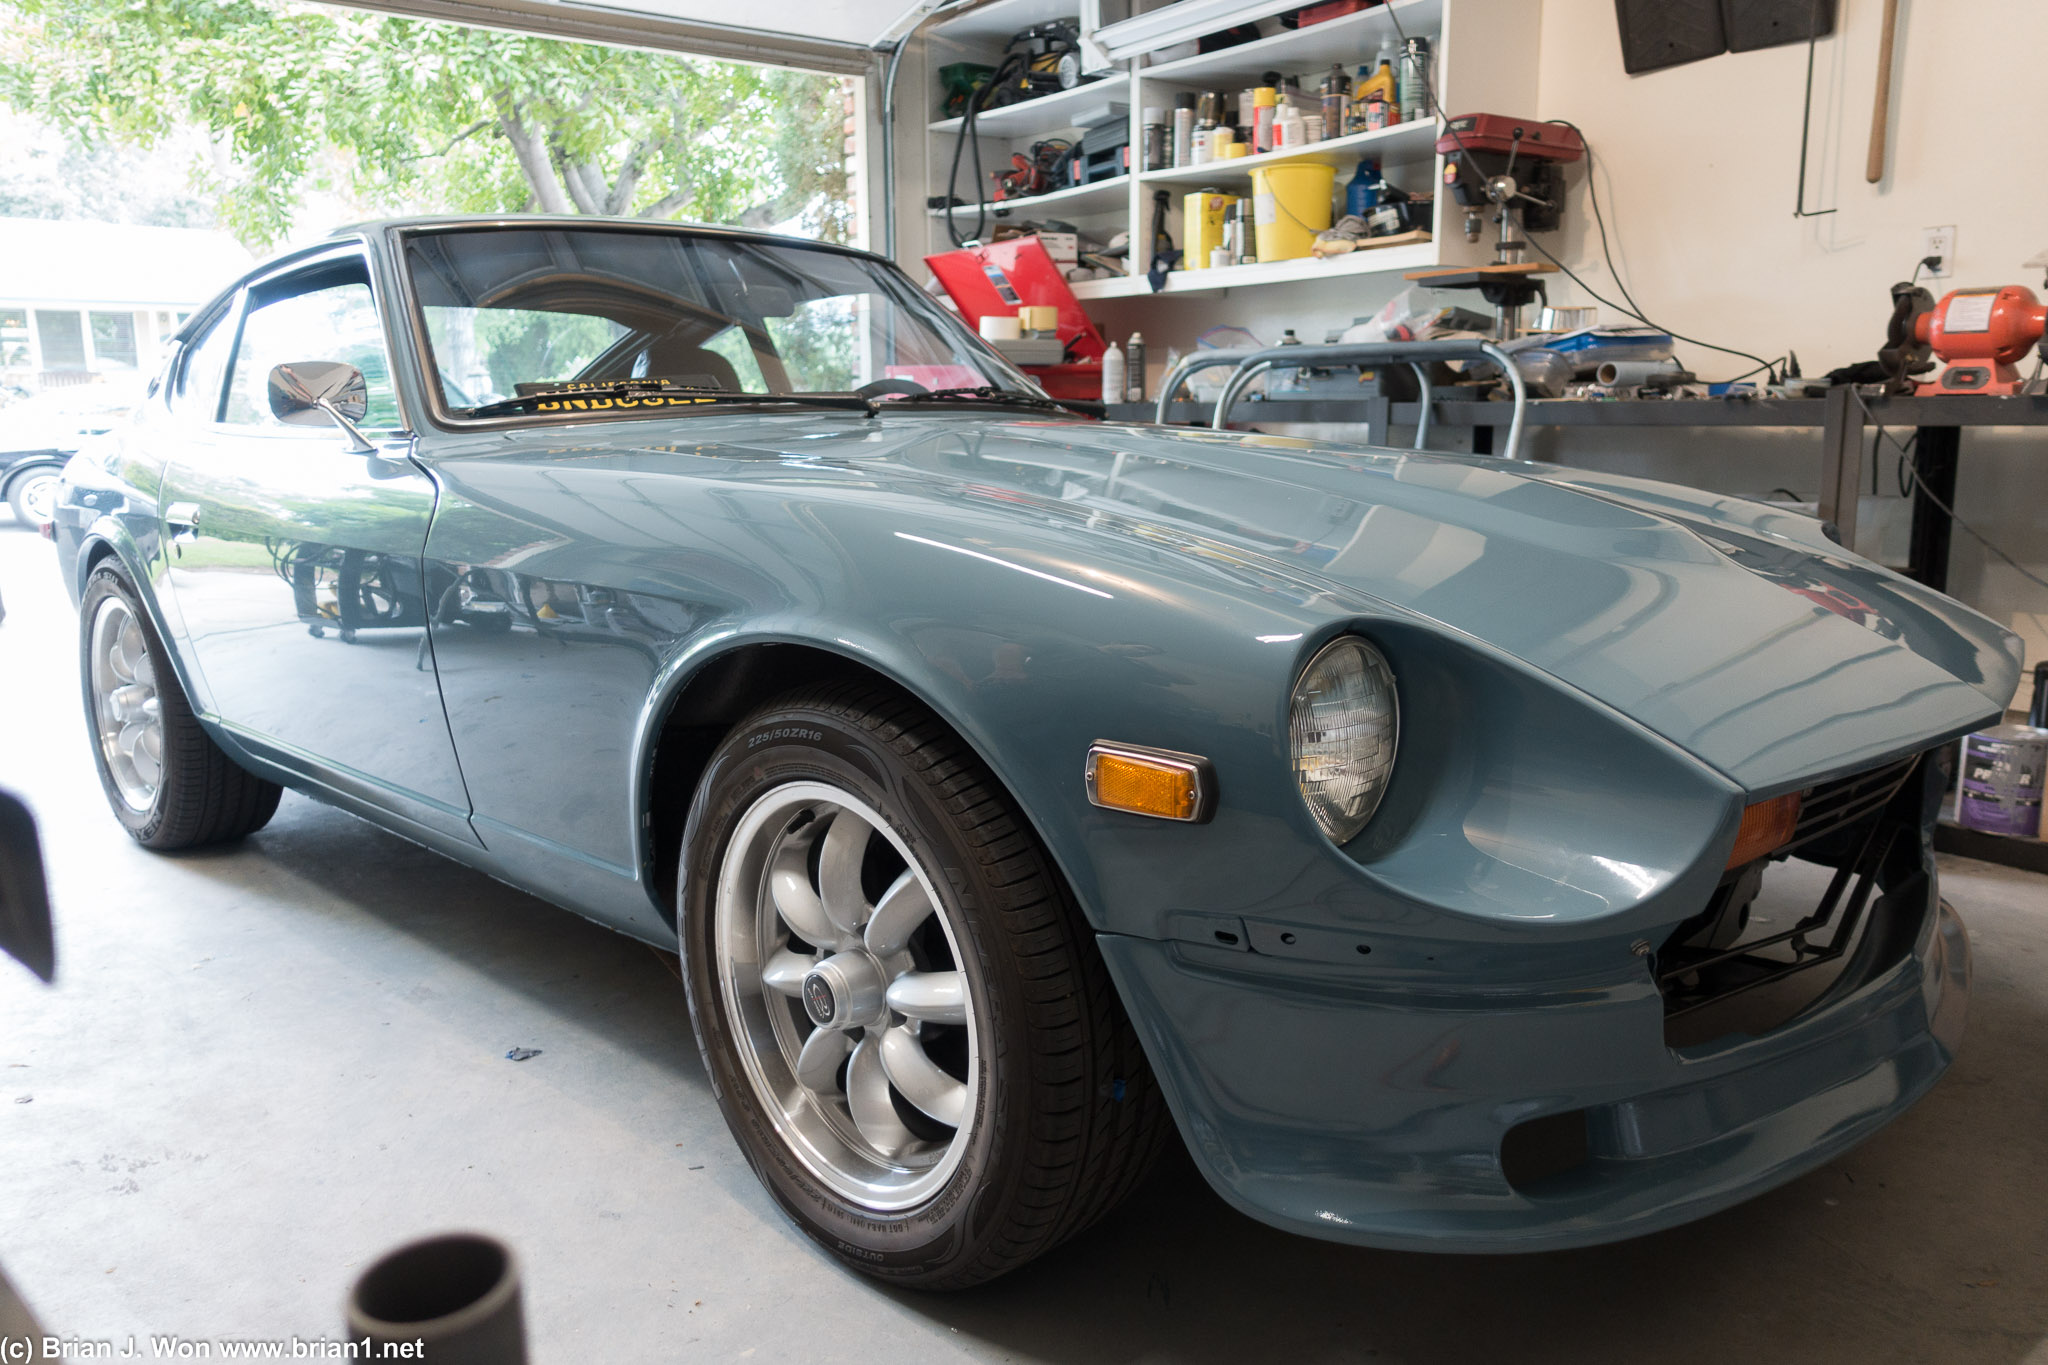 280Z. Nearly complete, mostly needs bumpers.